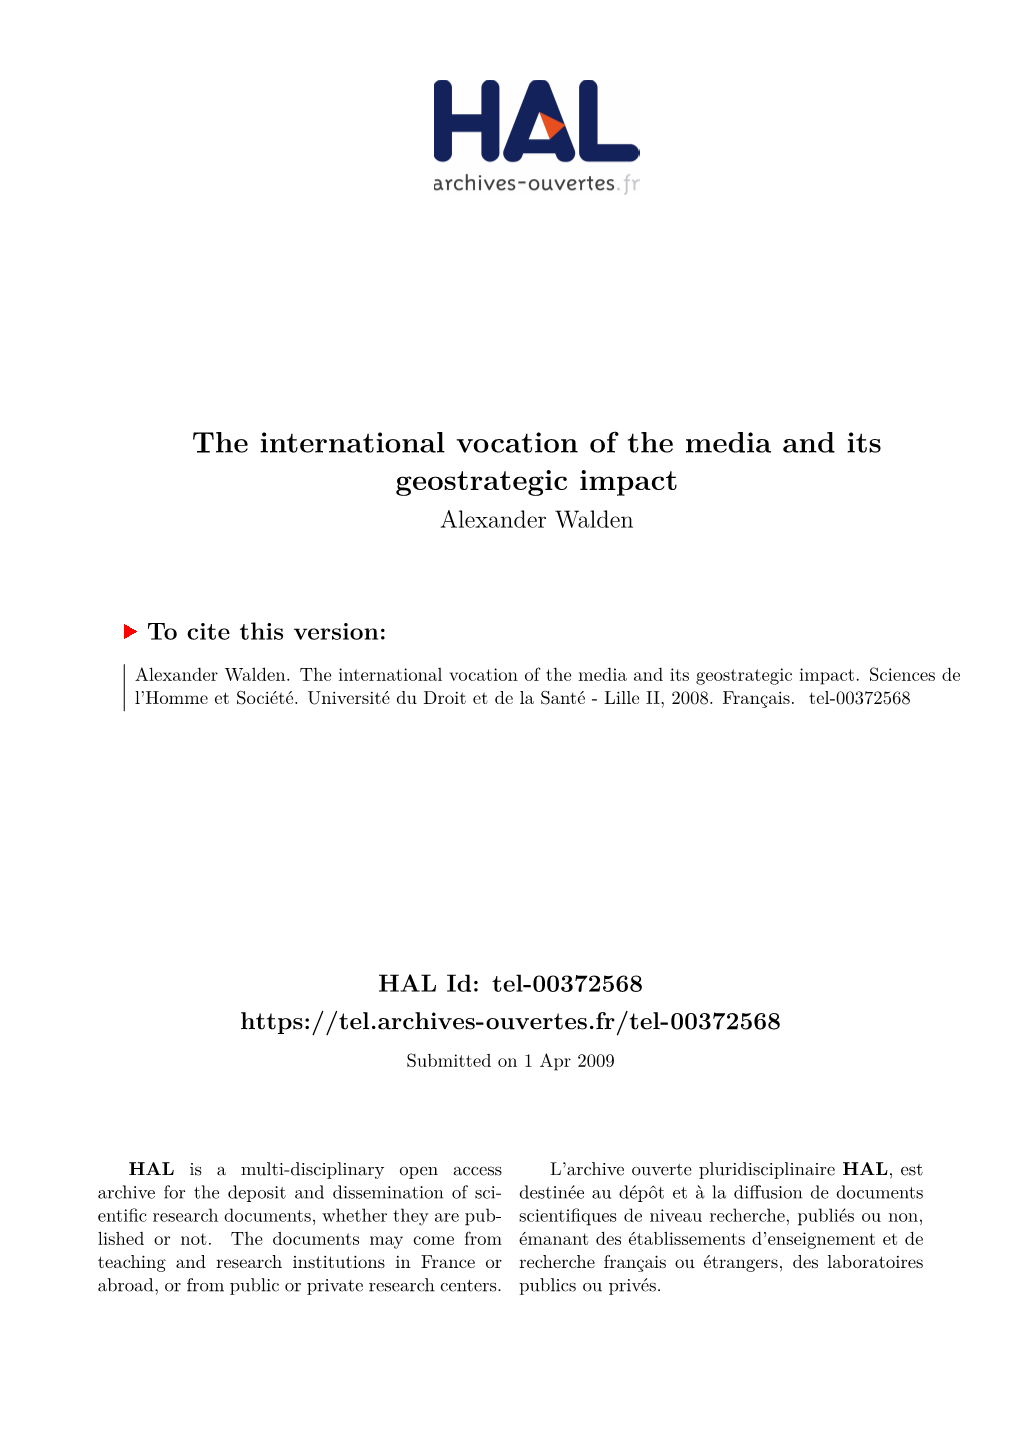 The International Vocation of the Media and Its Geostrategic Impact Alexander Walden